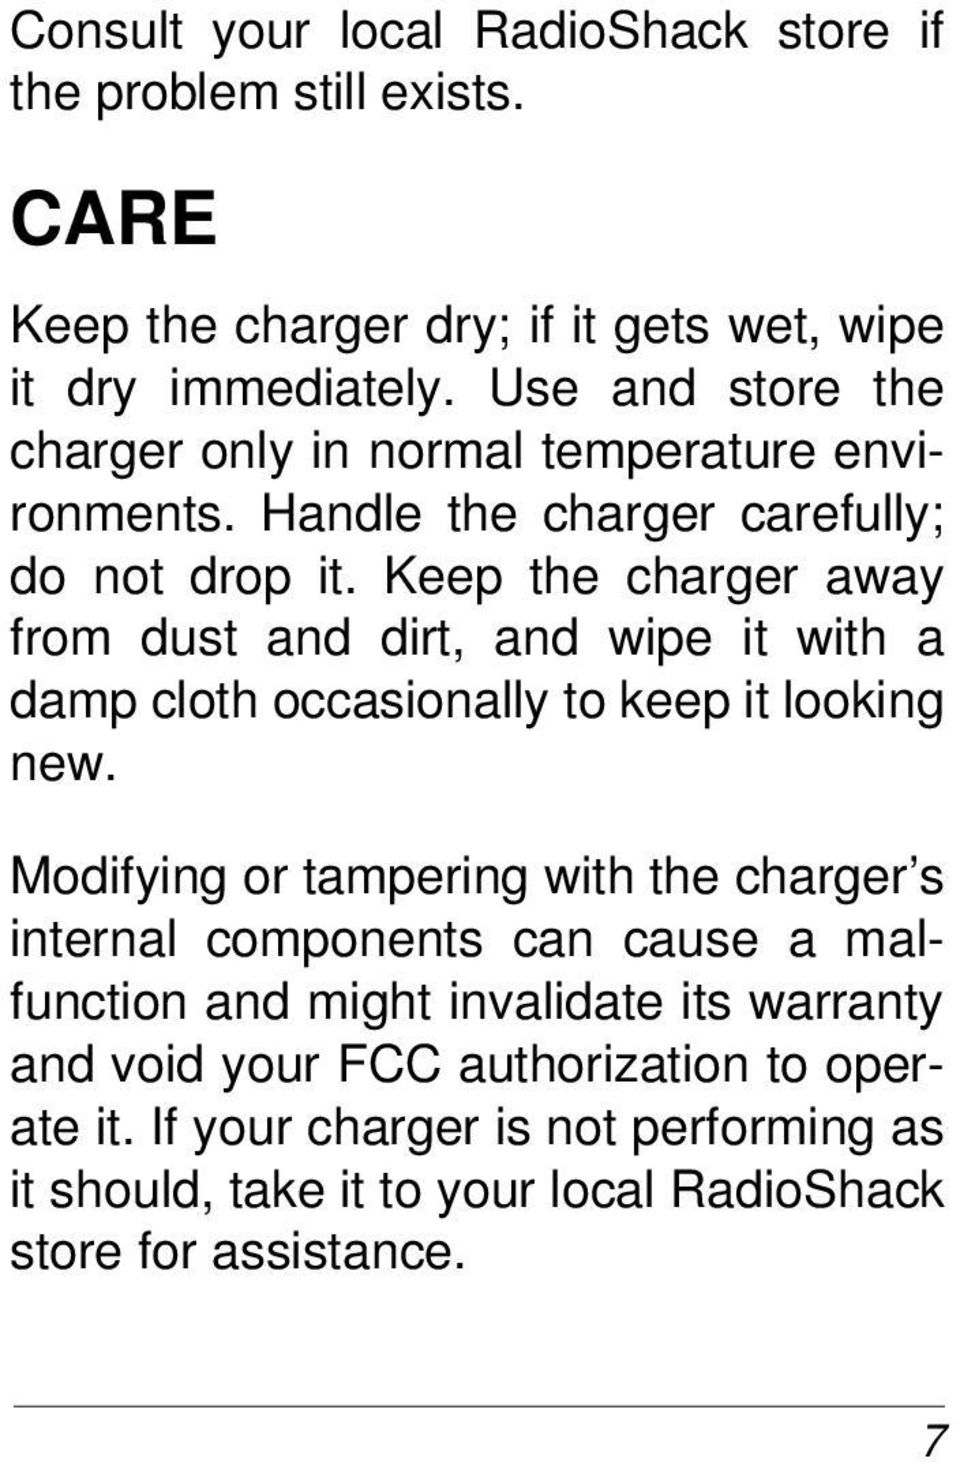 Keep the charger away from dust and dirt, and wipe it with a damp cloth occasionally to keep it looking new.